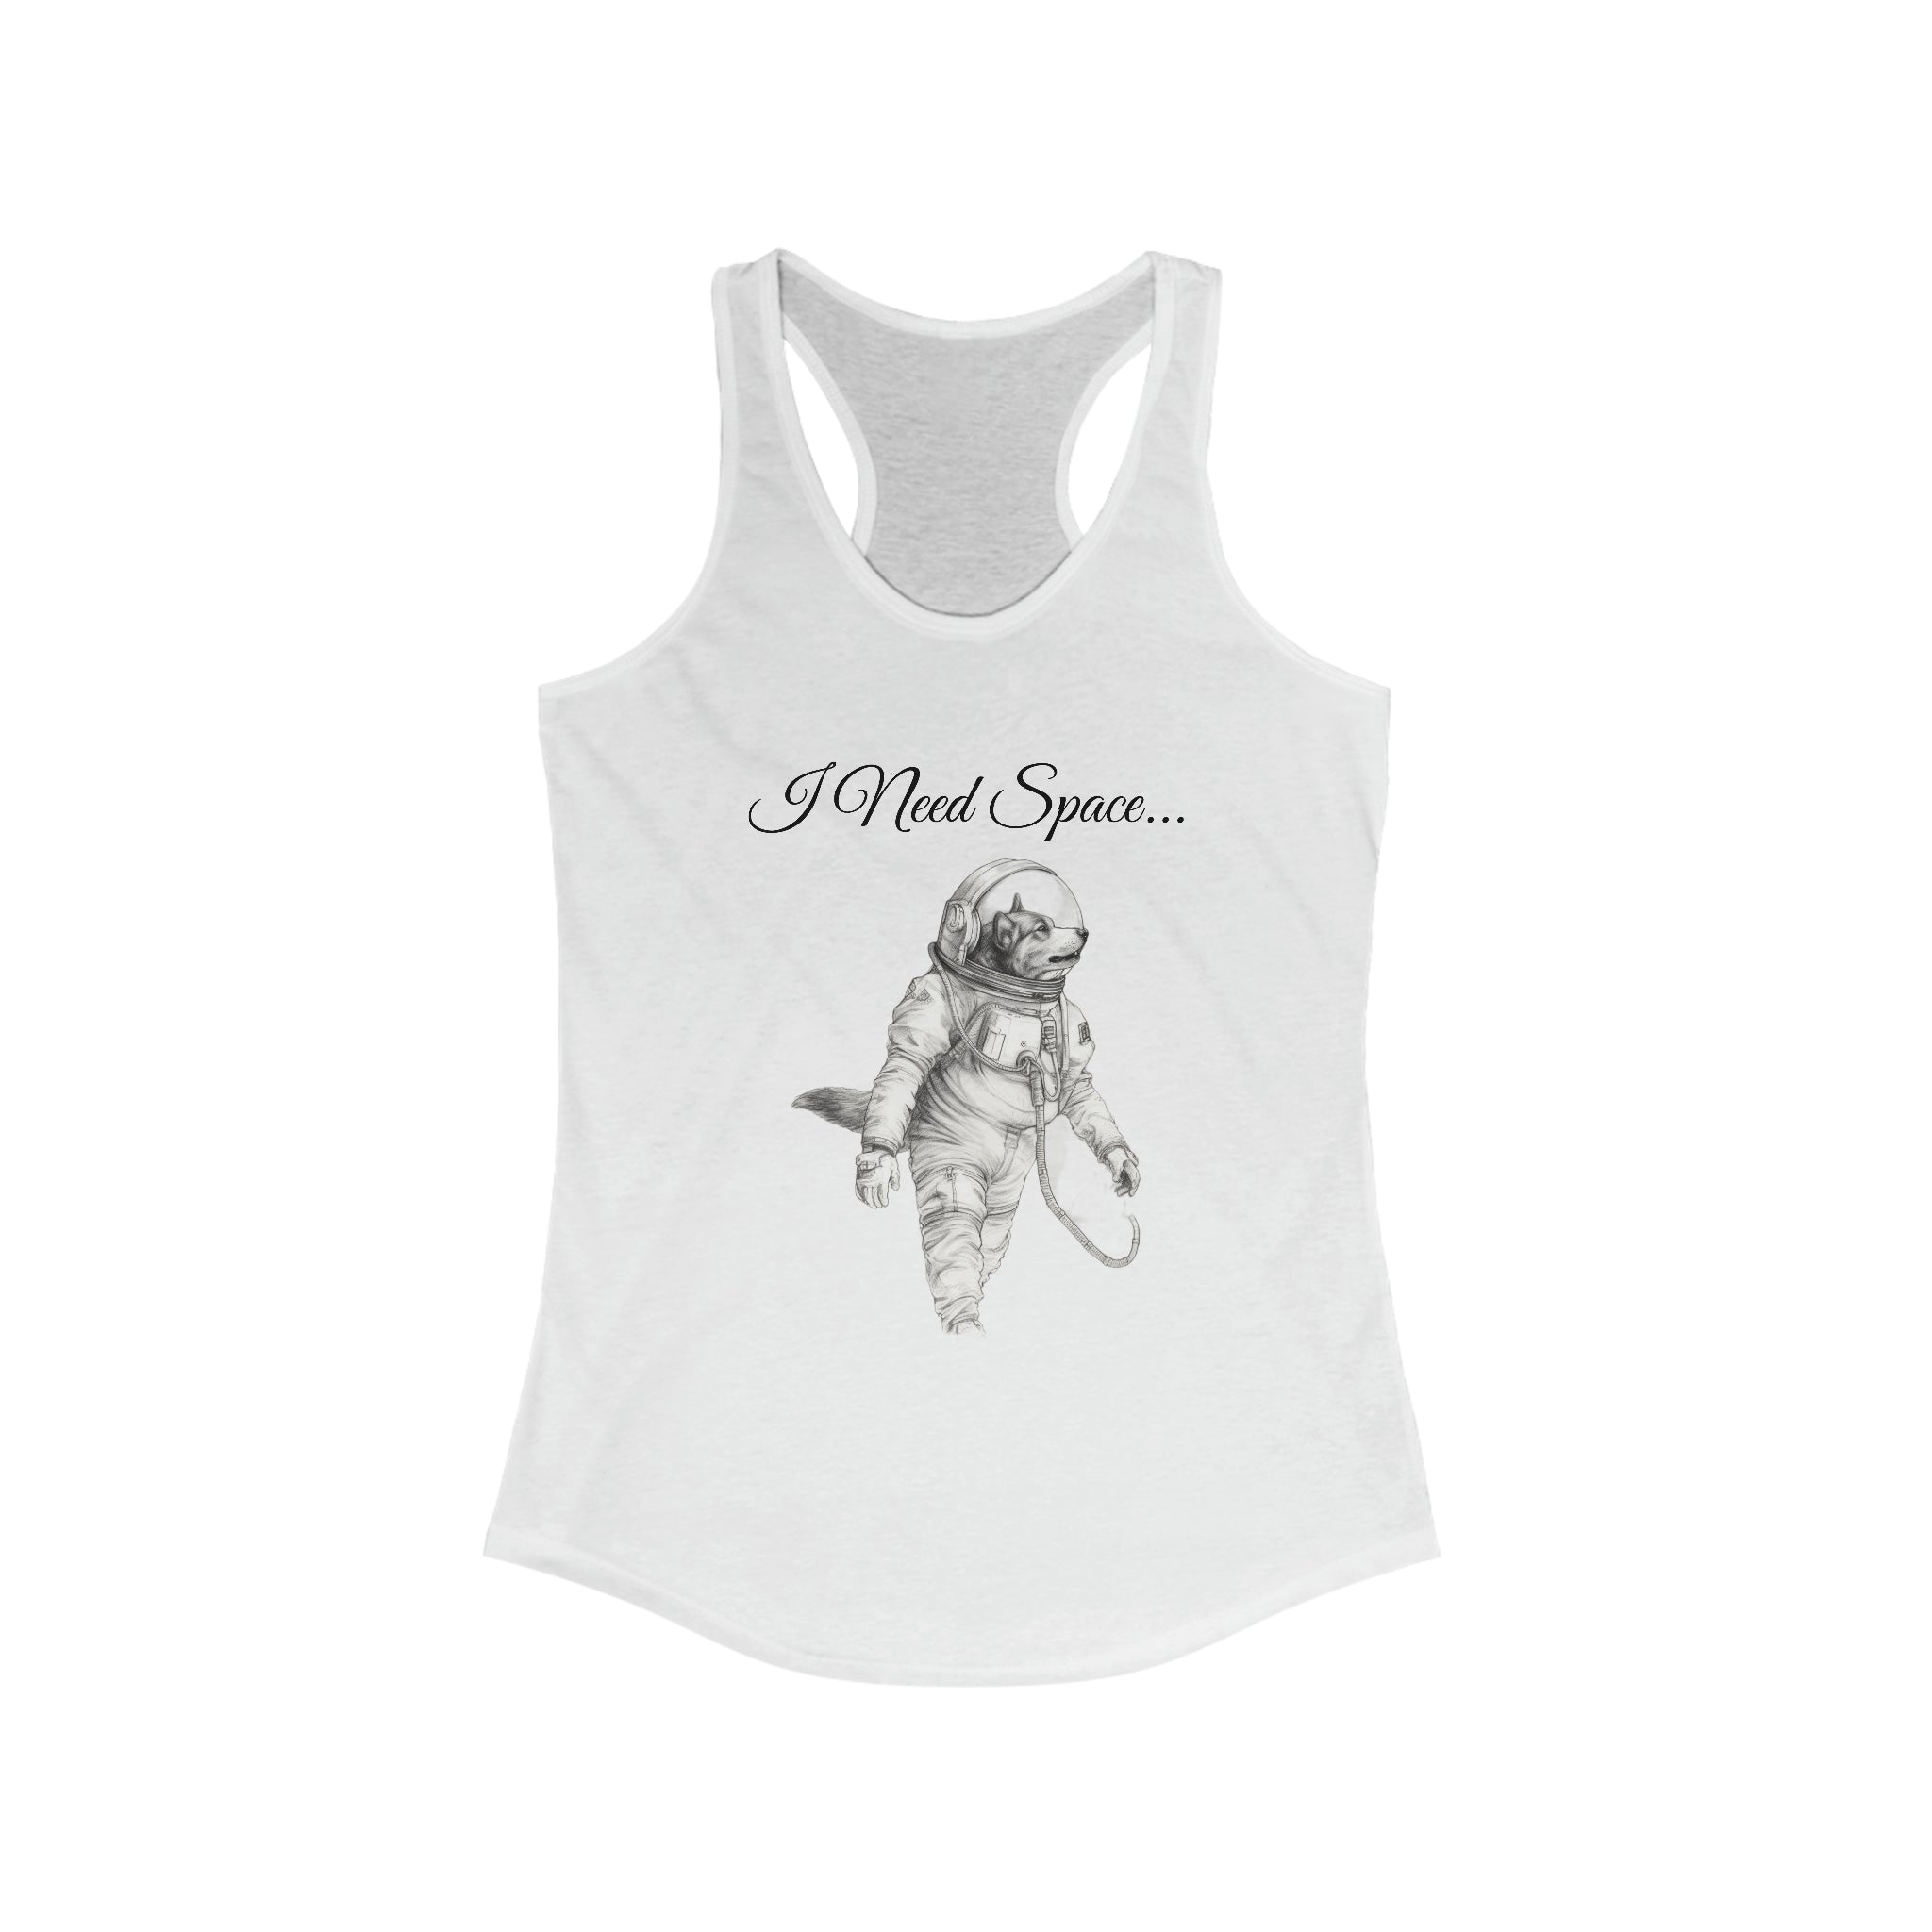 Astronaut Dog 'I Need Space' Women's Ideal Racerback Tank: Cosmic Canine Adventure Wear Gift for Him Shirt Gift for Making Gains with Style